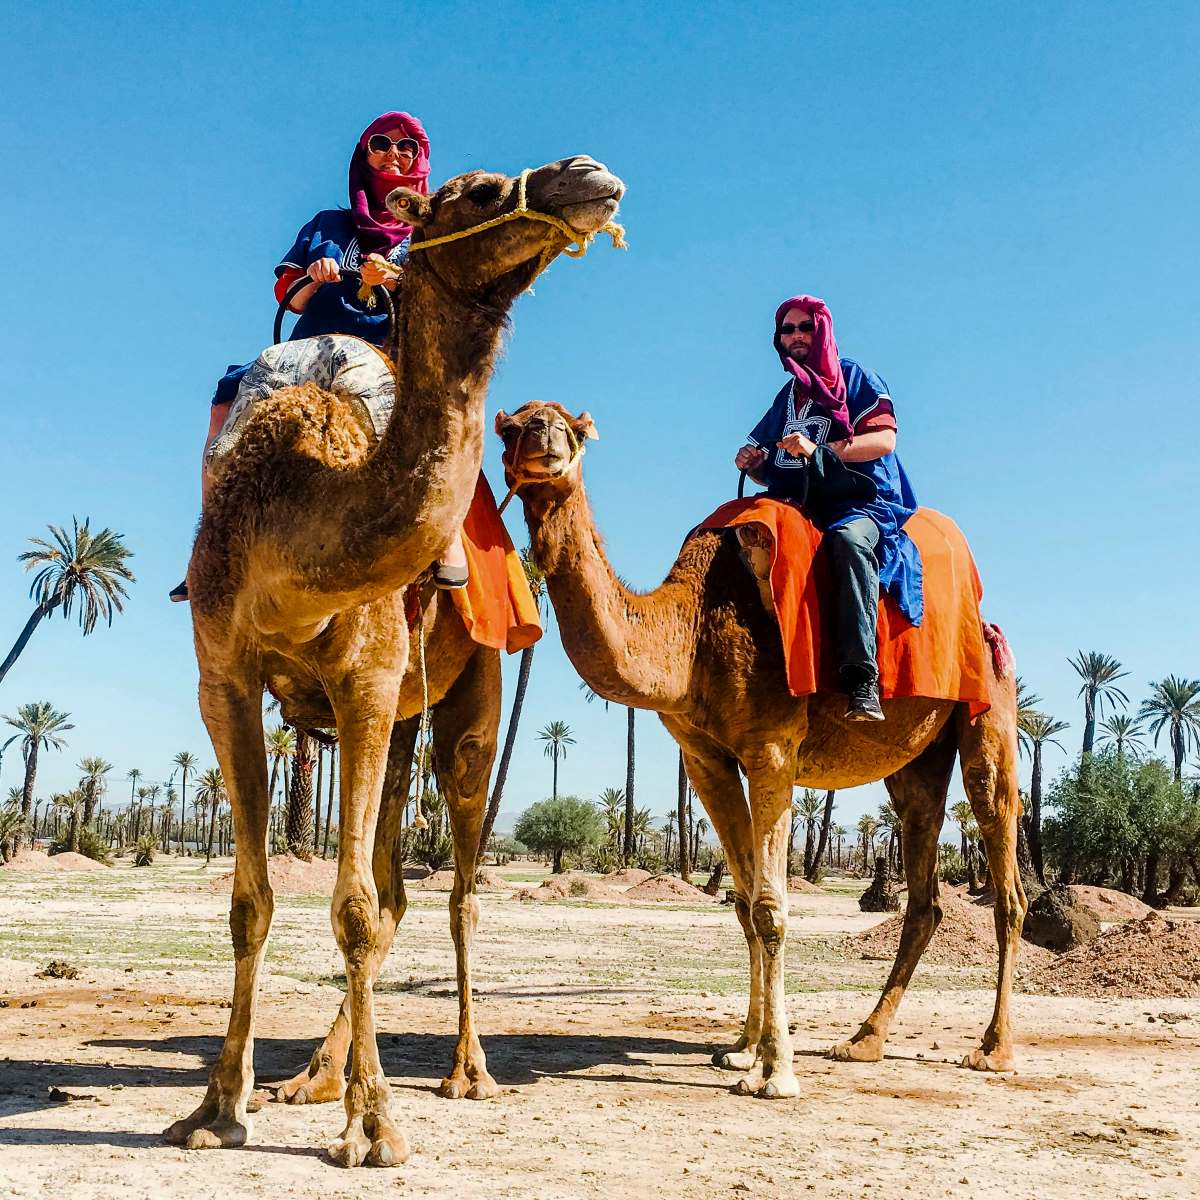 A couple riding two camels in the dessert of Marrakech.